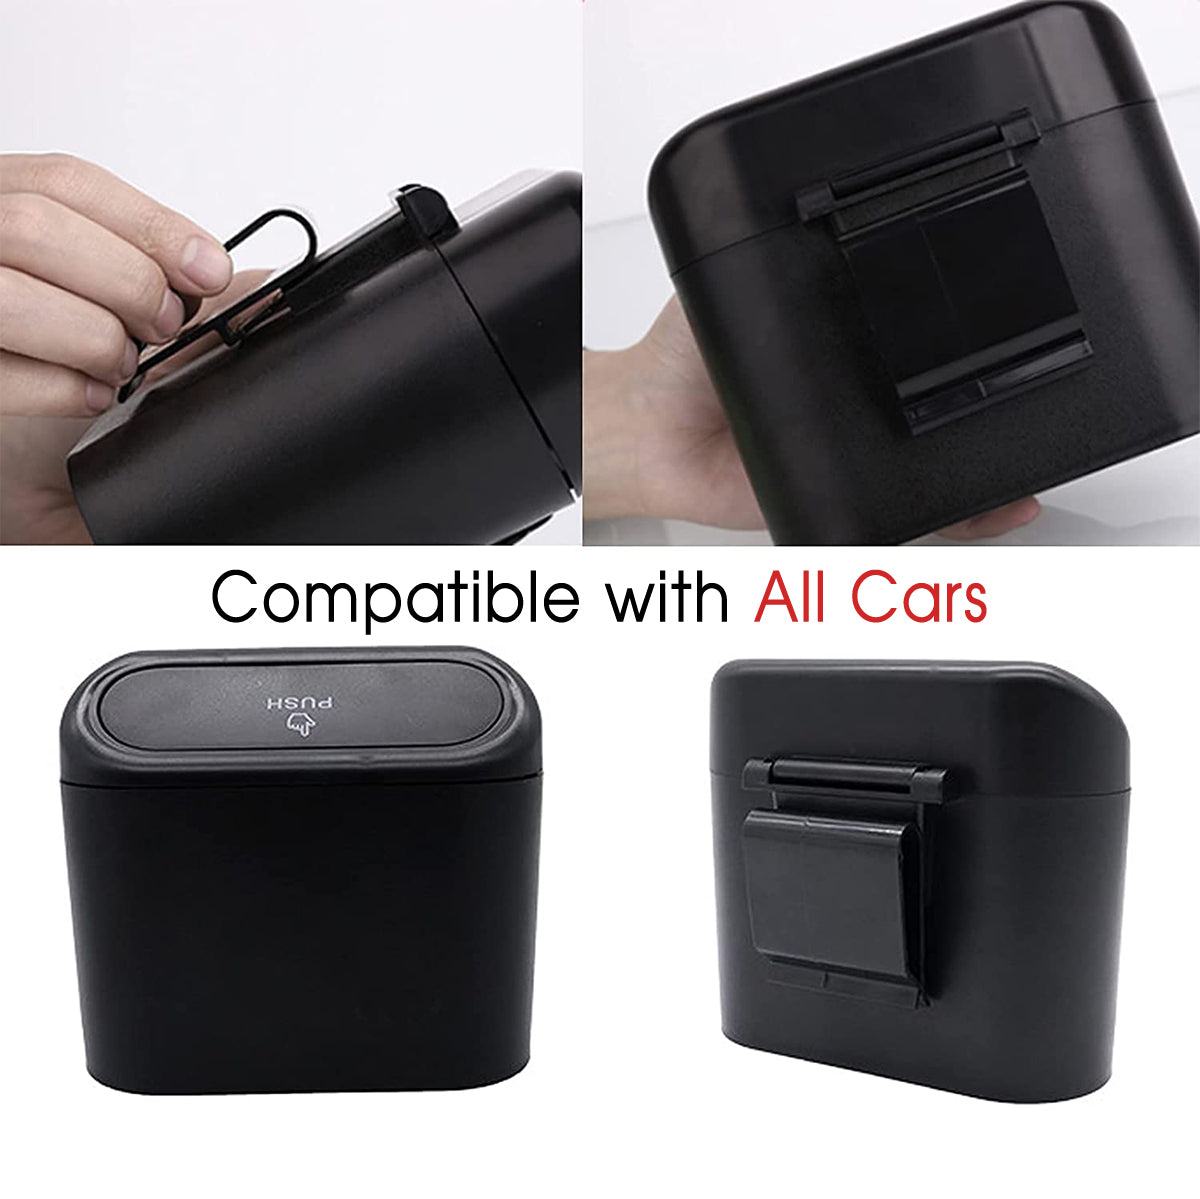 Car Trash Can, Custom For Your Cars, Mini Car Accessories with Lid and Trash Bag, Cute Car Organizer Bin, Small Garbage Can for Storage and Organization, Car Accessories FJ11996